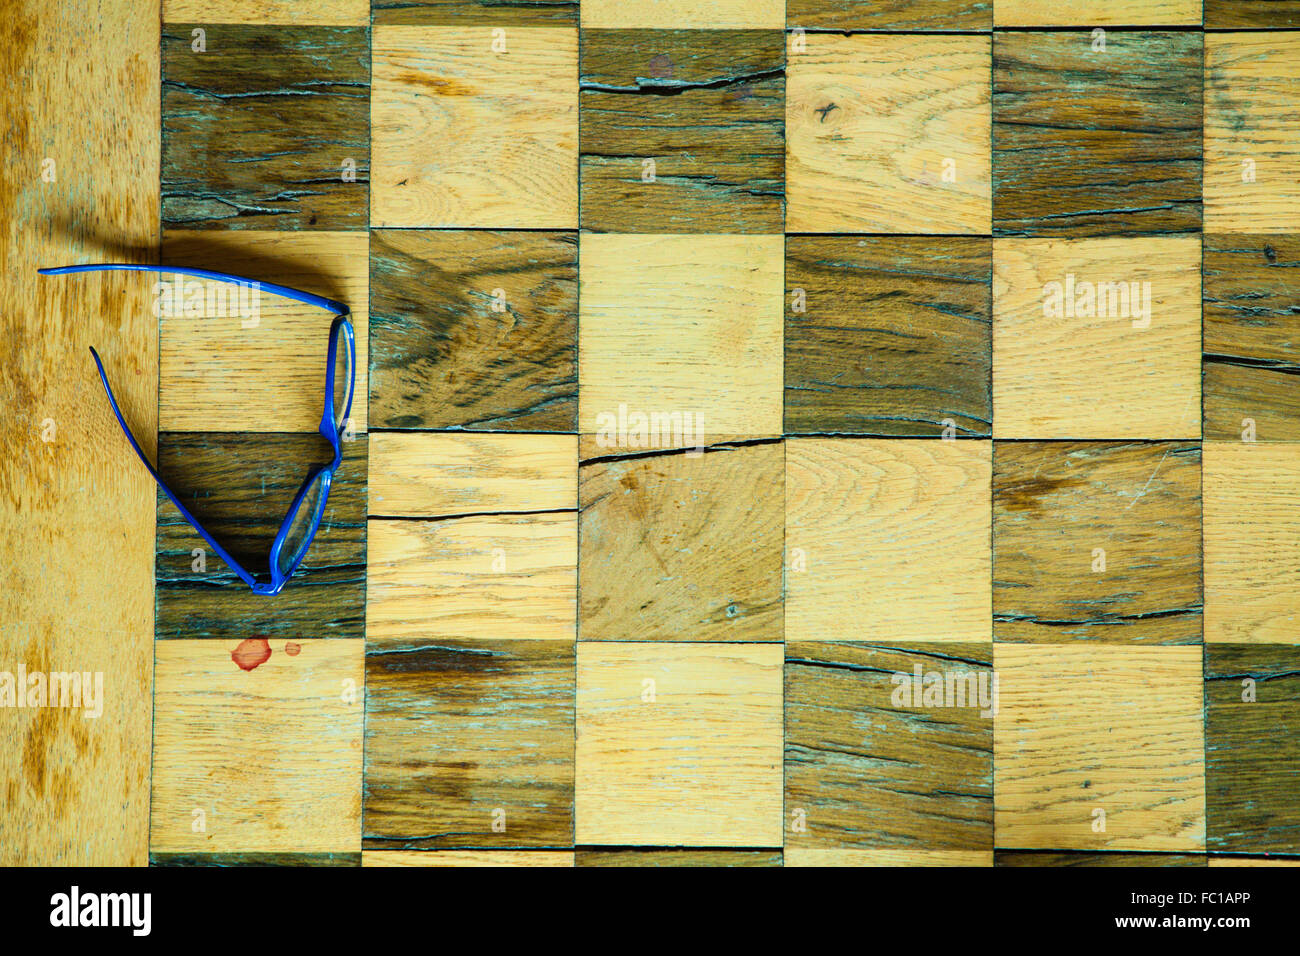 Part of chess old wooden table and glasses Stock Photo